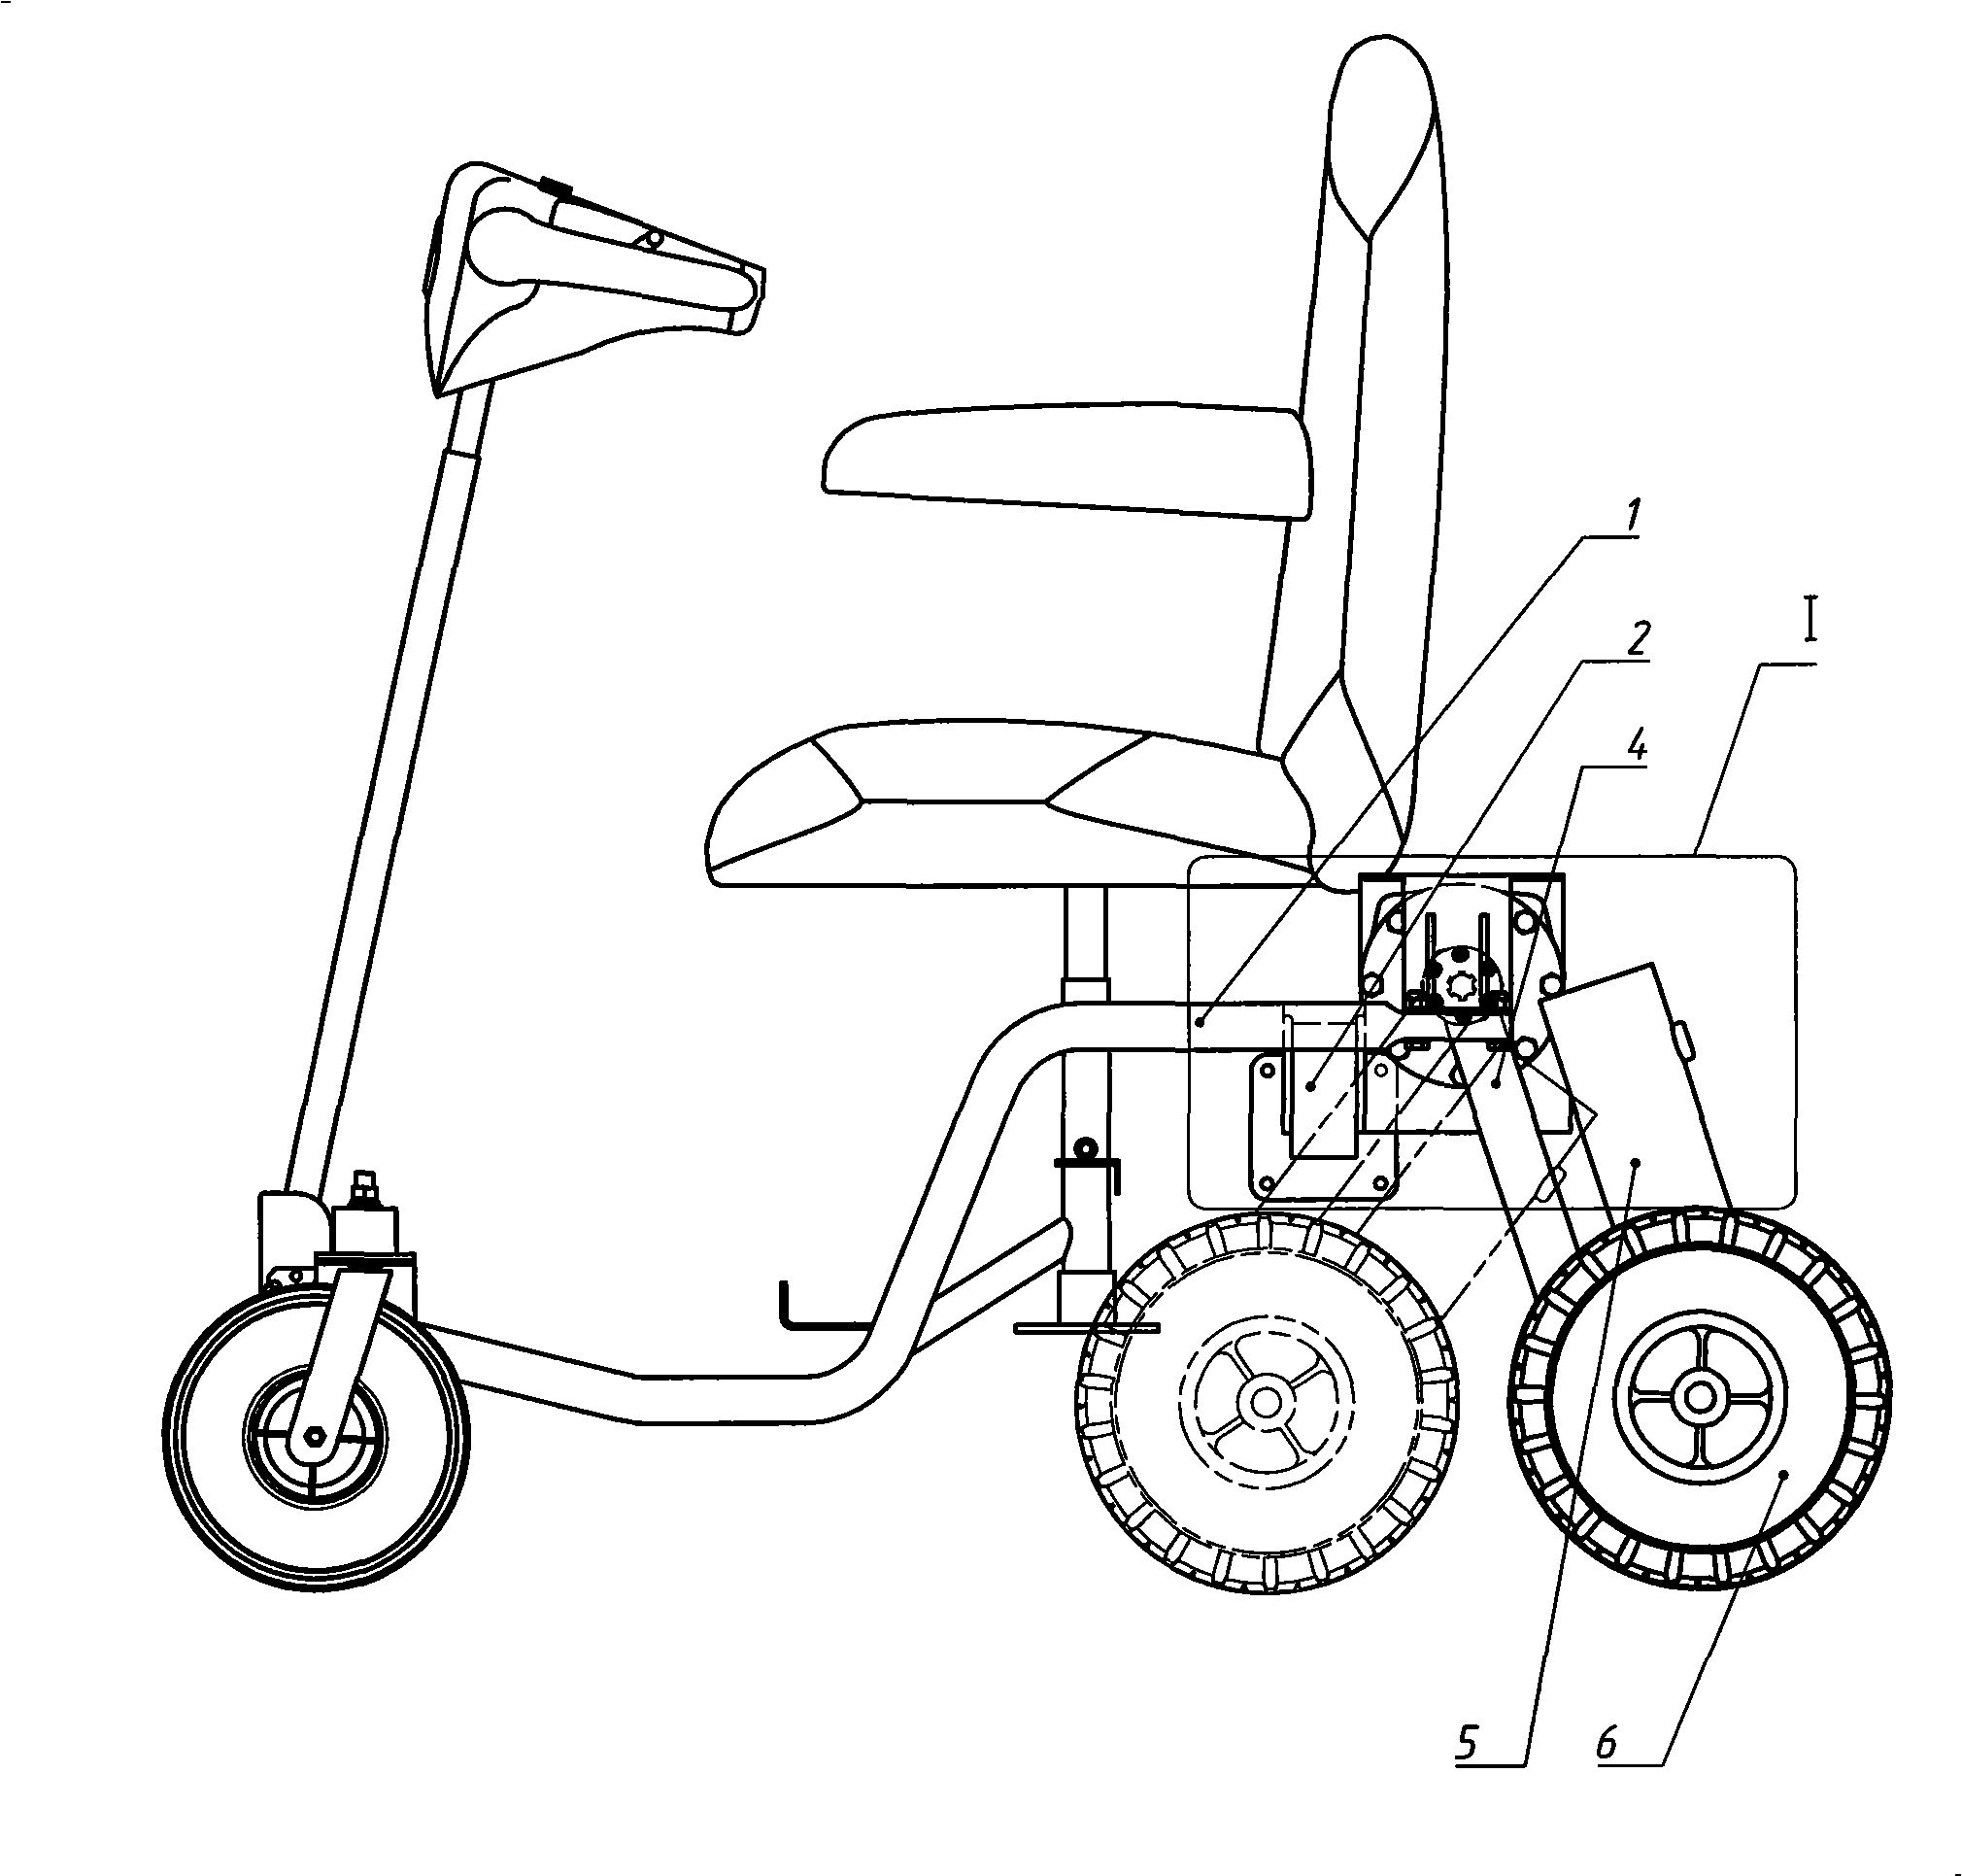 Electric bicycle rear suspension system with worm and gear mechanism for regulating wheelbase